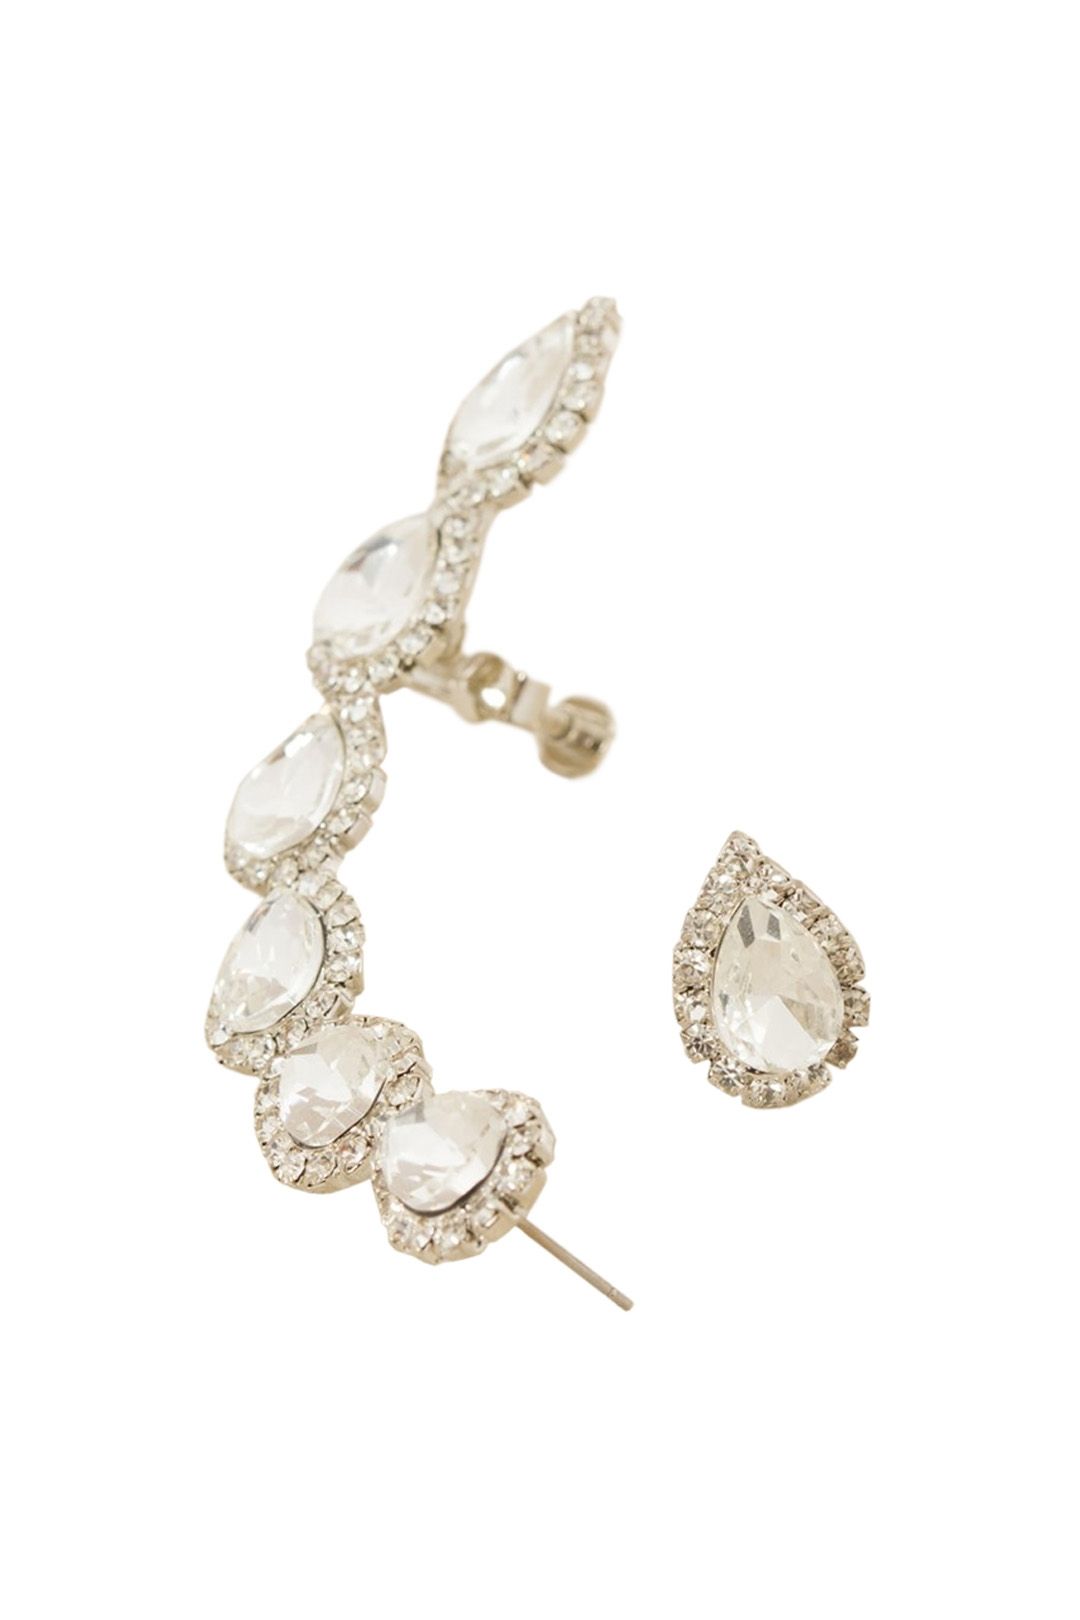 Adorne - Diamante Jewelled Teardrops Ear Cuff and Stud - Silver - Front